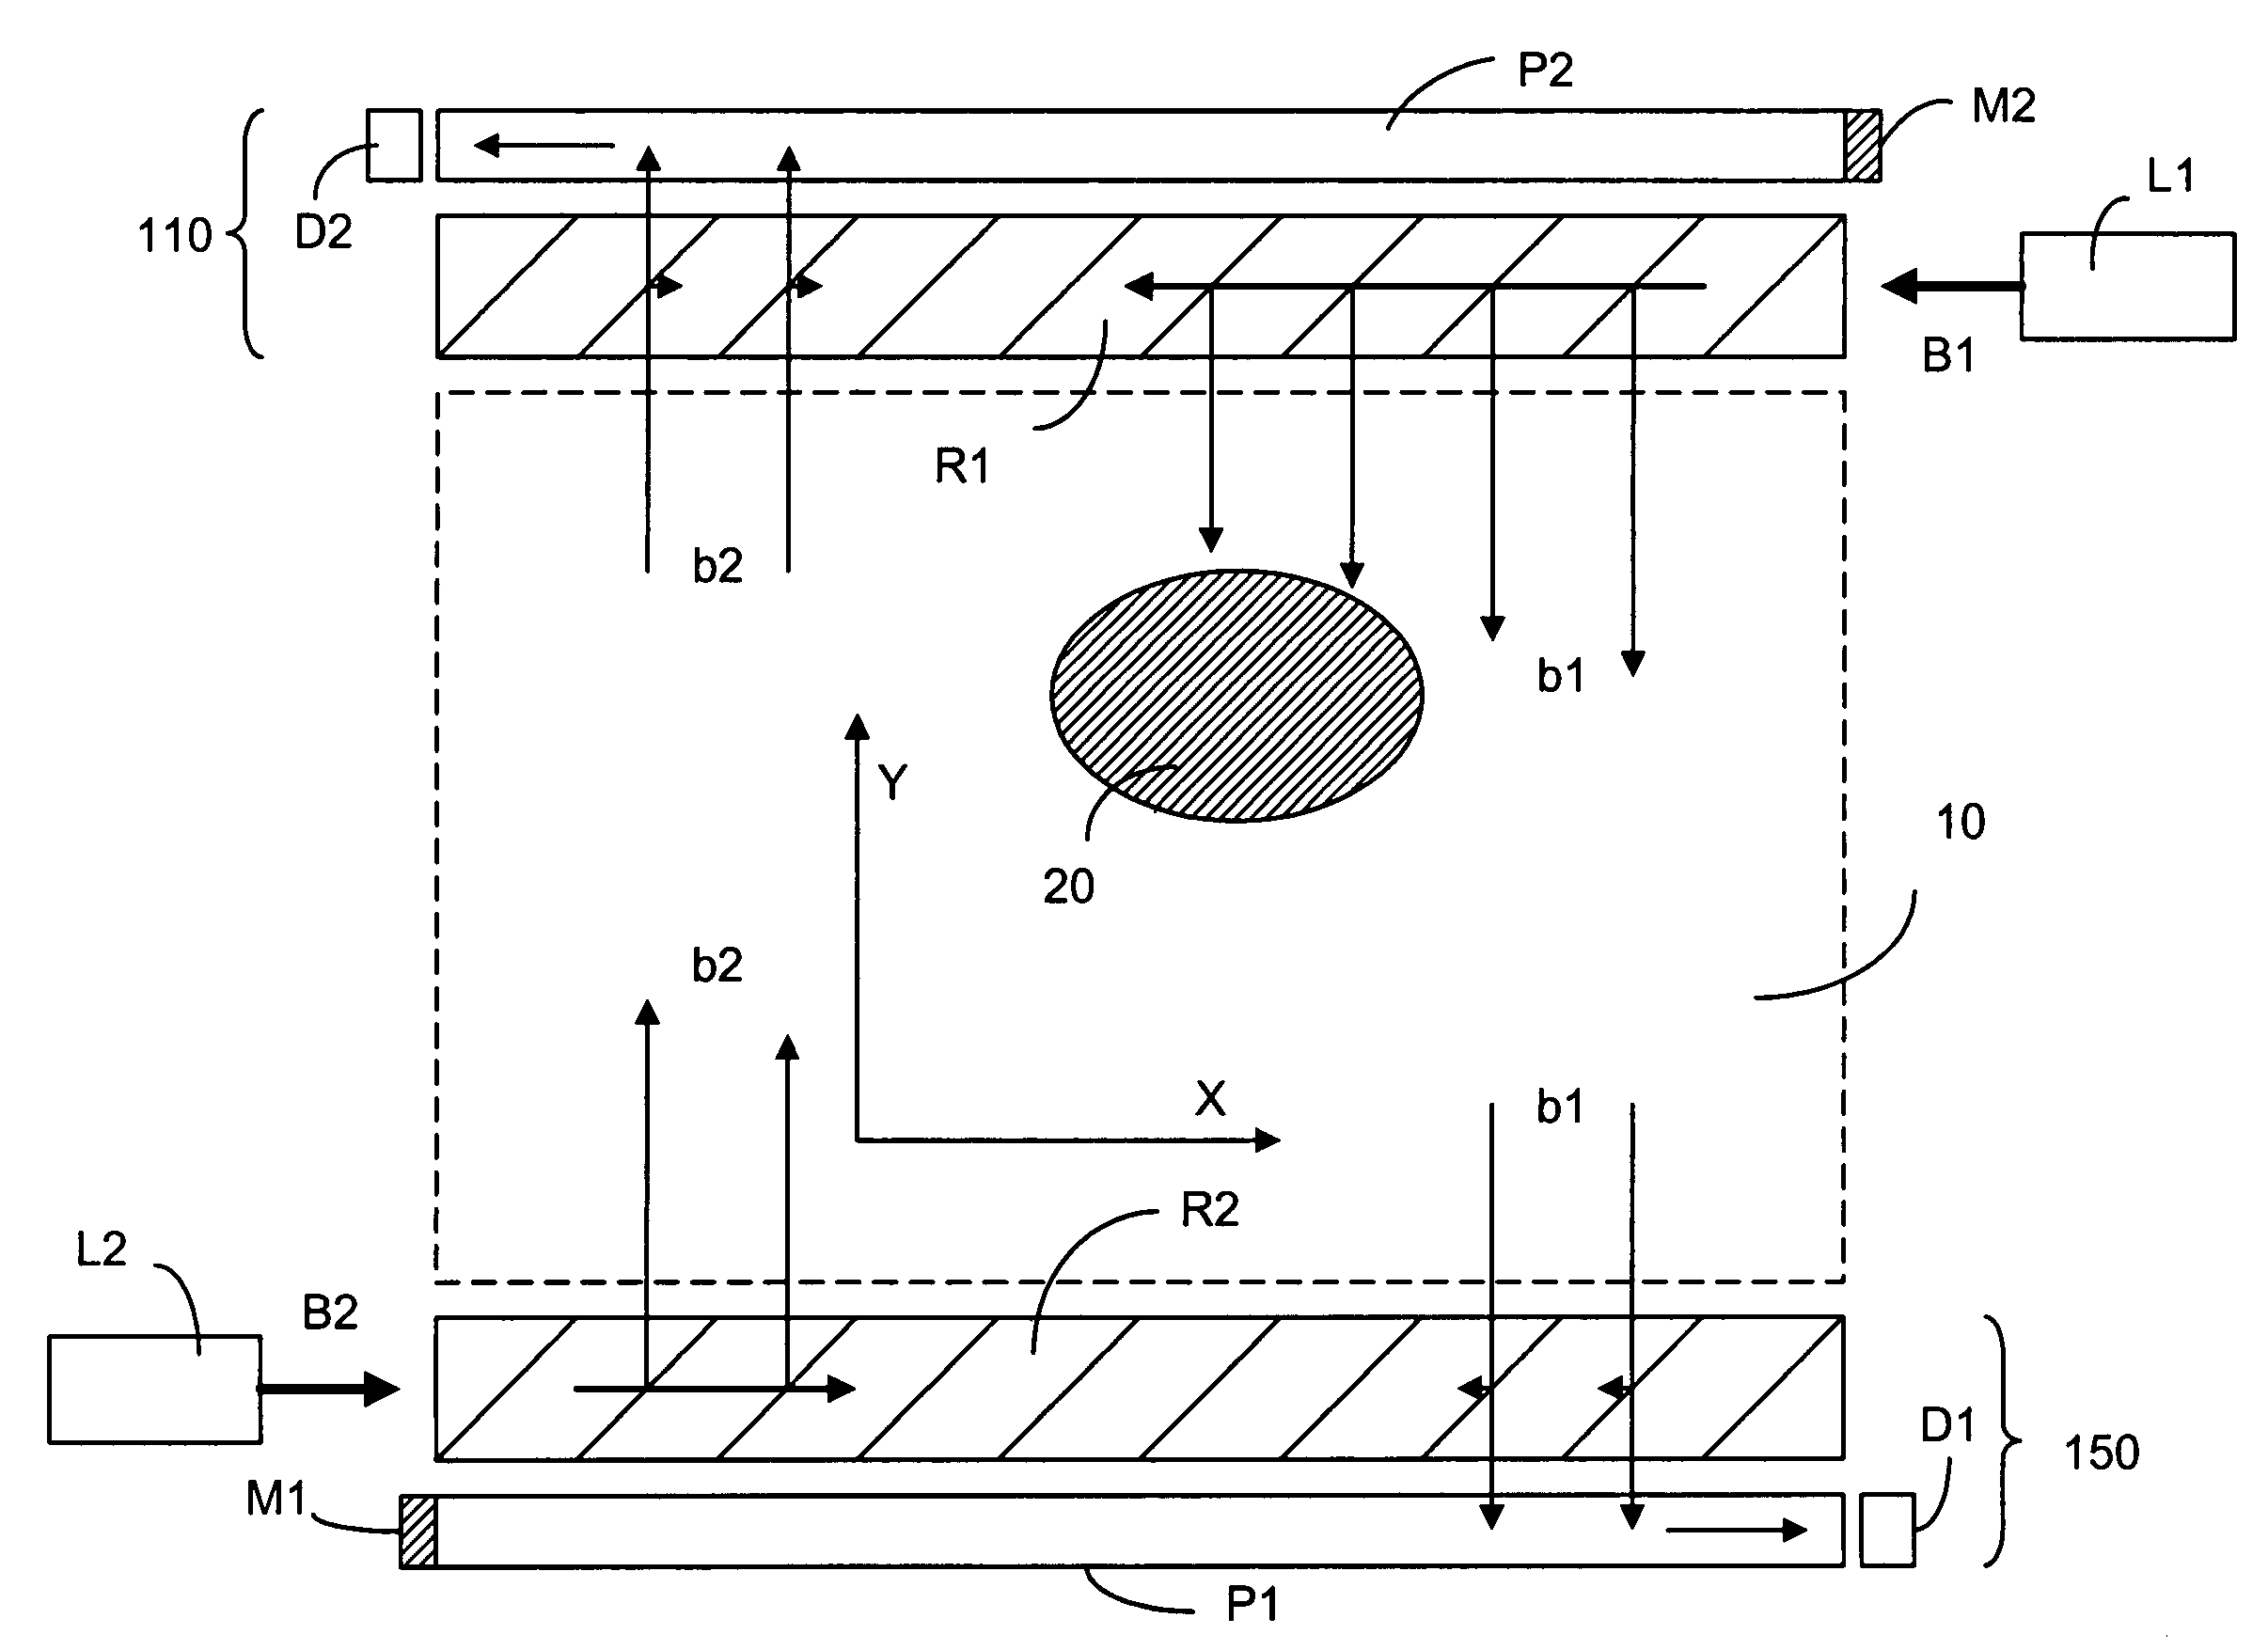 Method and device for detecting touch pad input